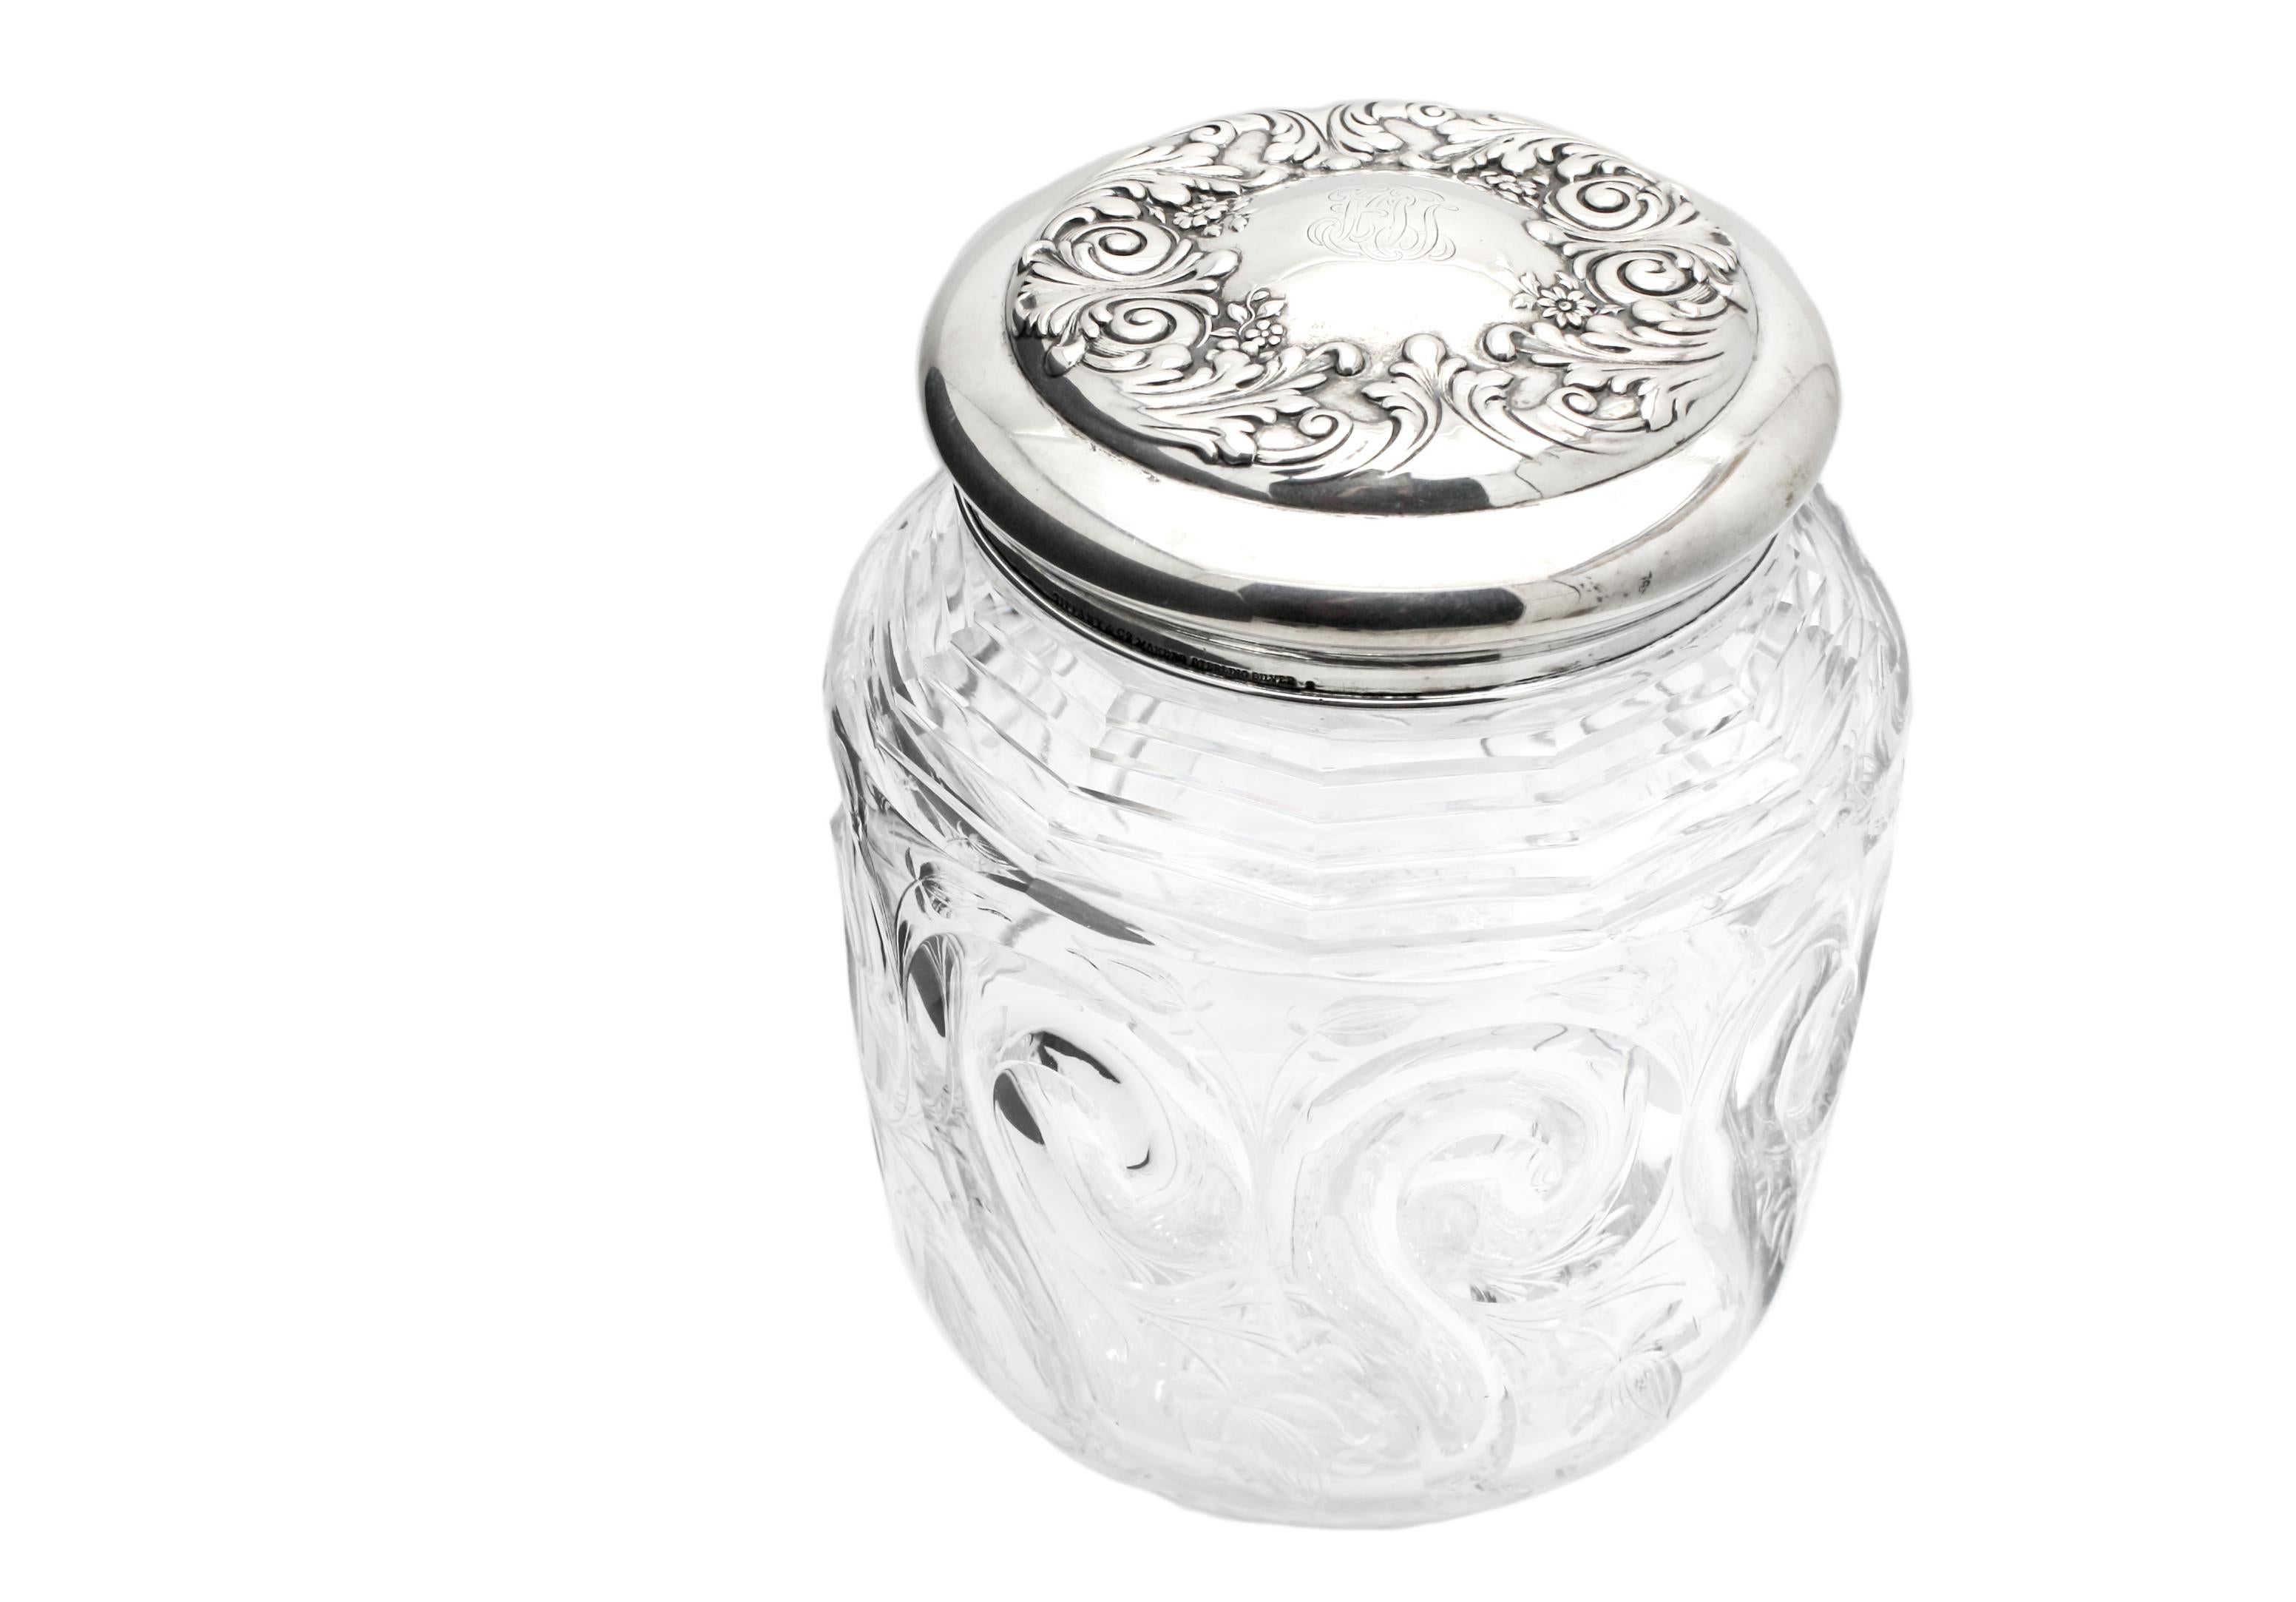 This is an exceptional and rare example of John Hoare's workmanship in the classic lidded biscuit barrel. The body is wheel cut with an Art Nouveau swirling tusk pattern accompanied by engraved flowers and an intricately cut base. It is further